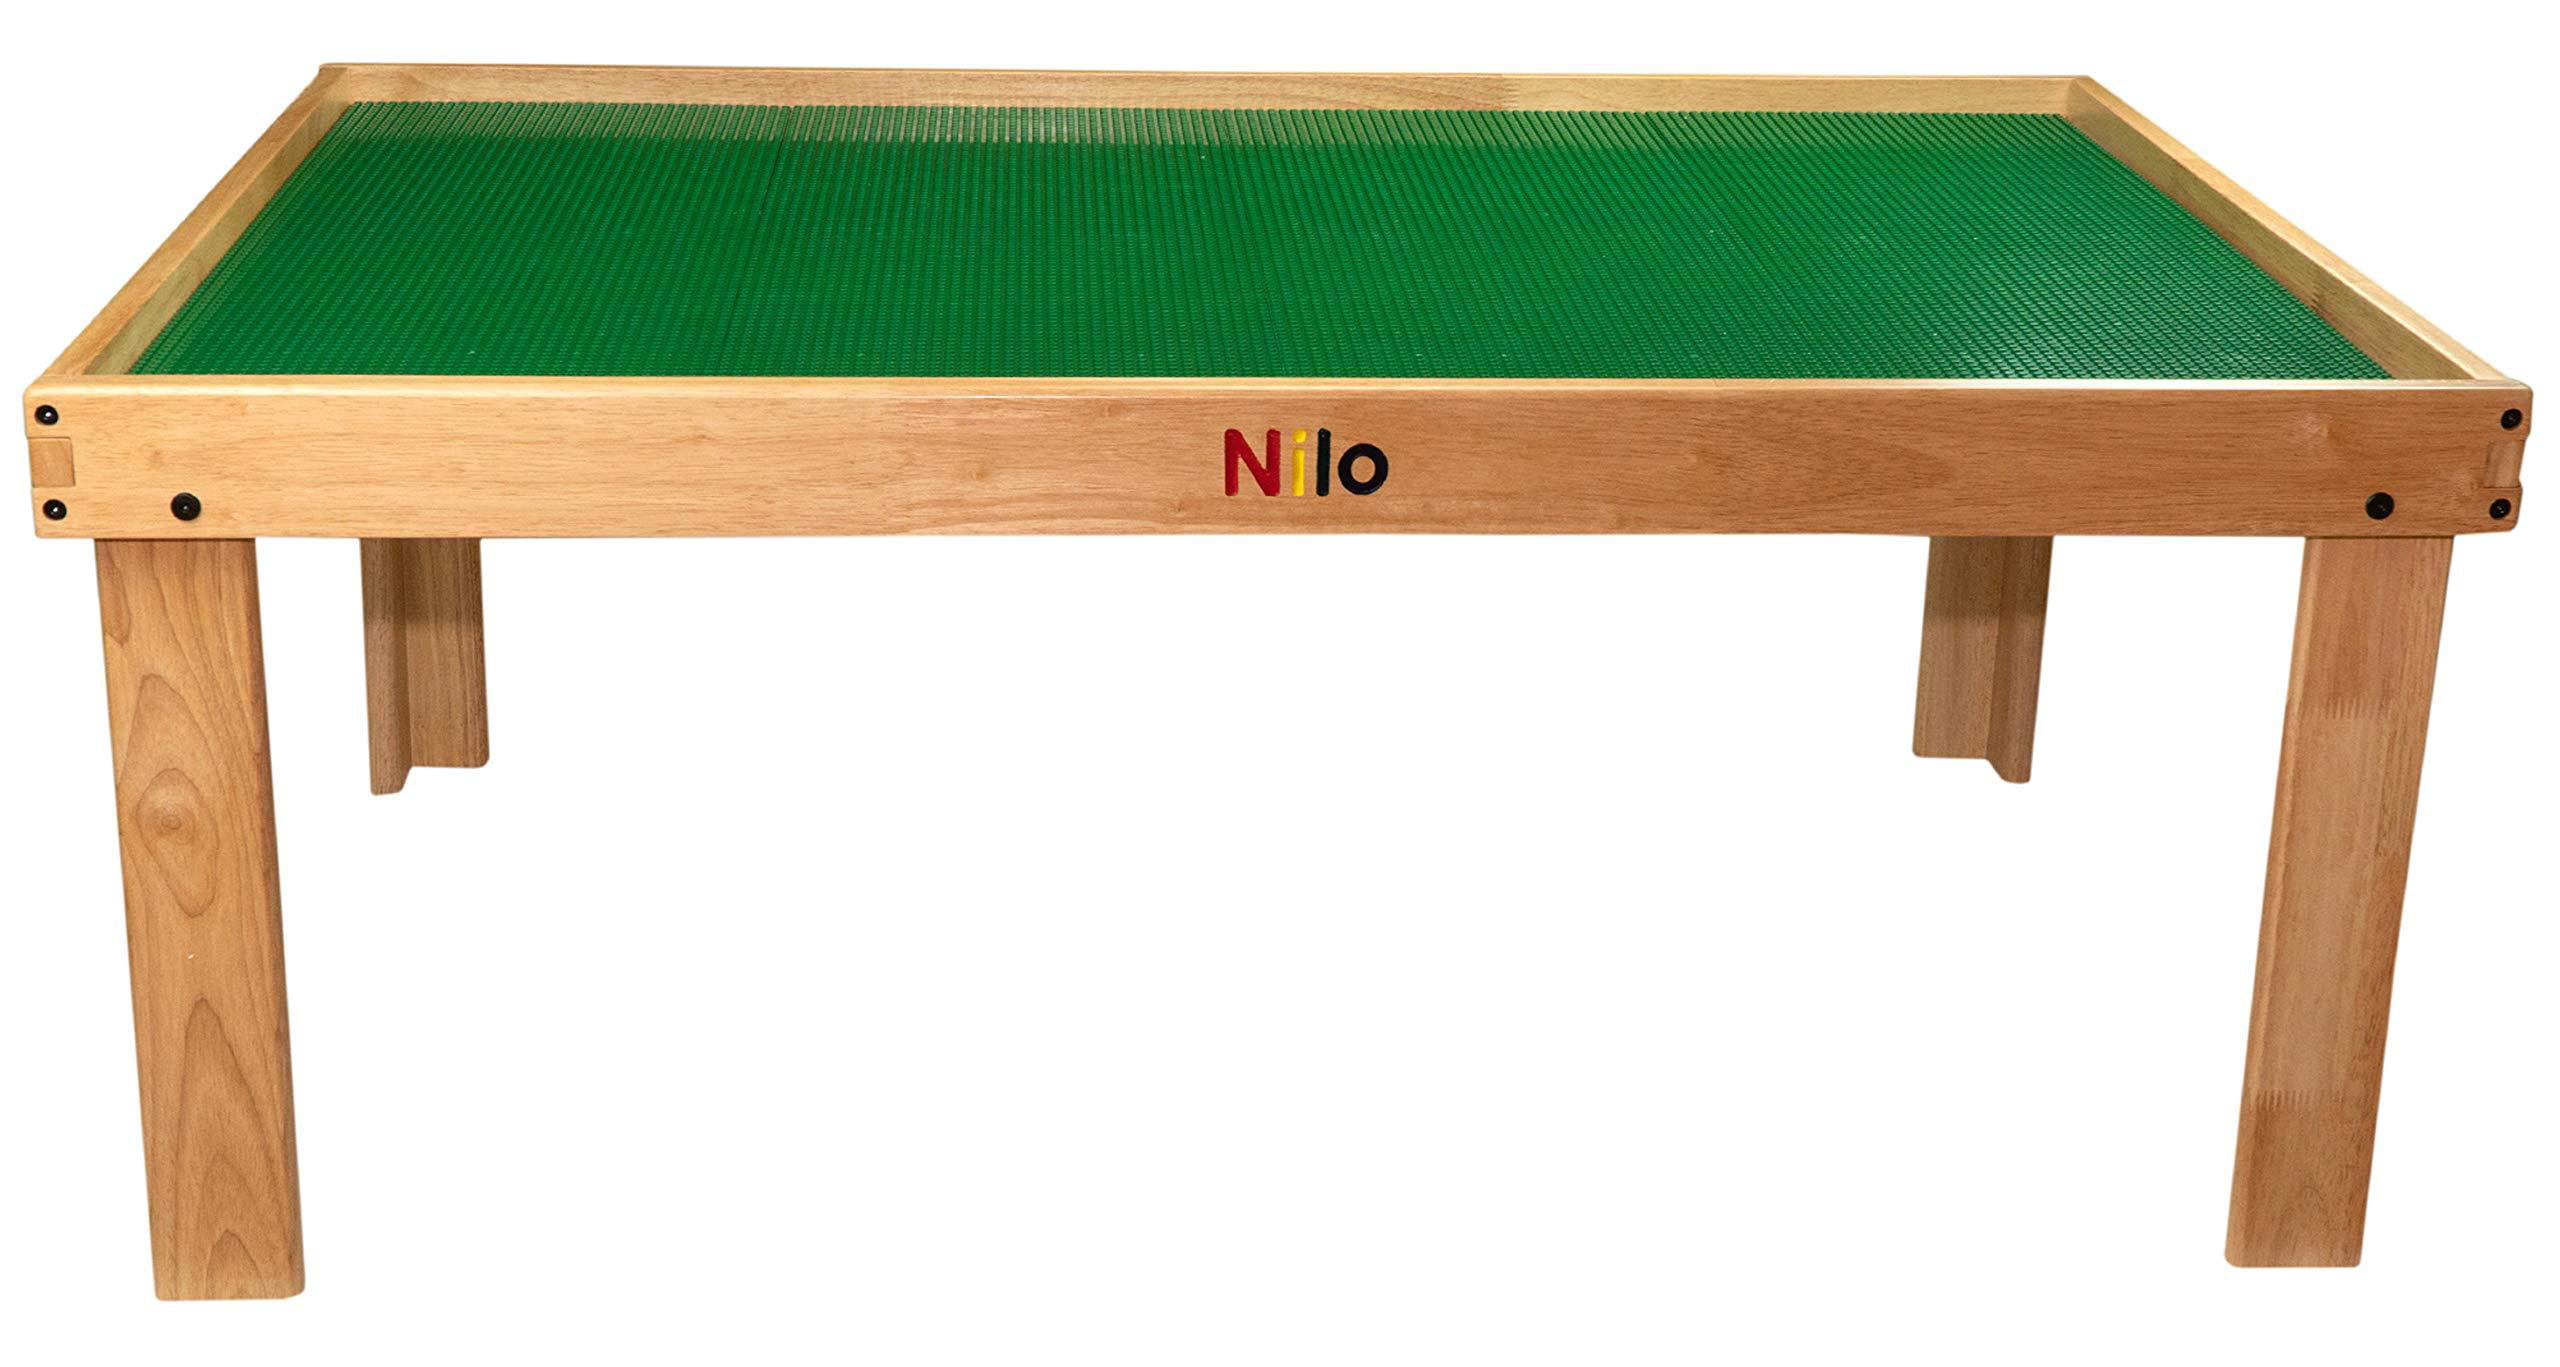 Nilo 2-Sided Building Block Mat - Building Sets by Nilo Playtables 